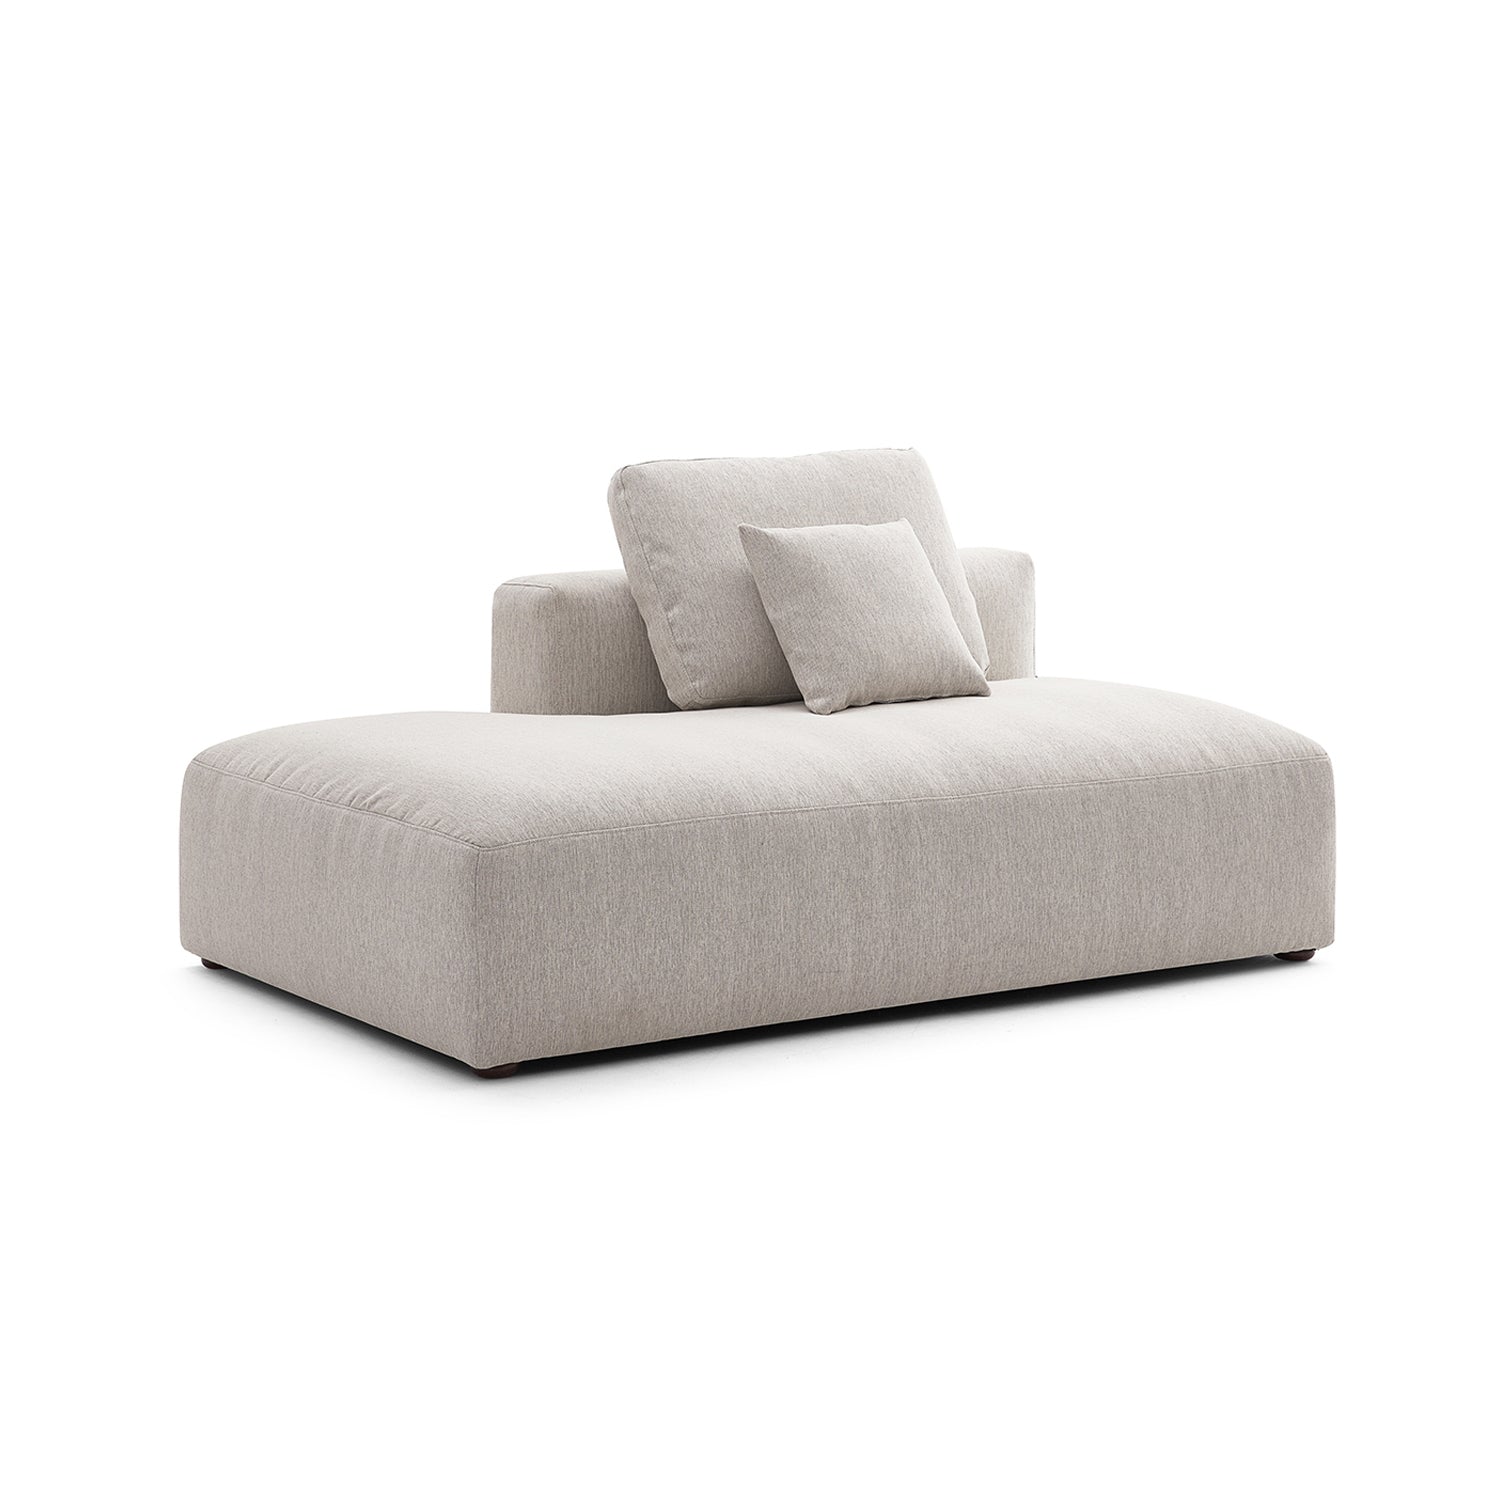 The 5th Side Lounge, Modular Sofa, Foundry | Valyou Furniture 